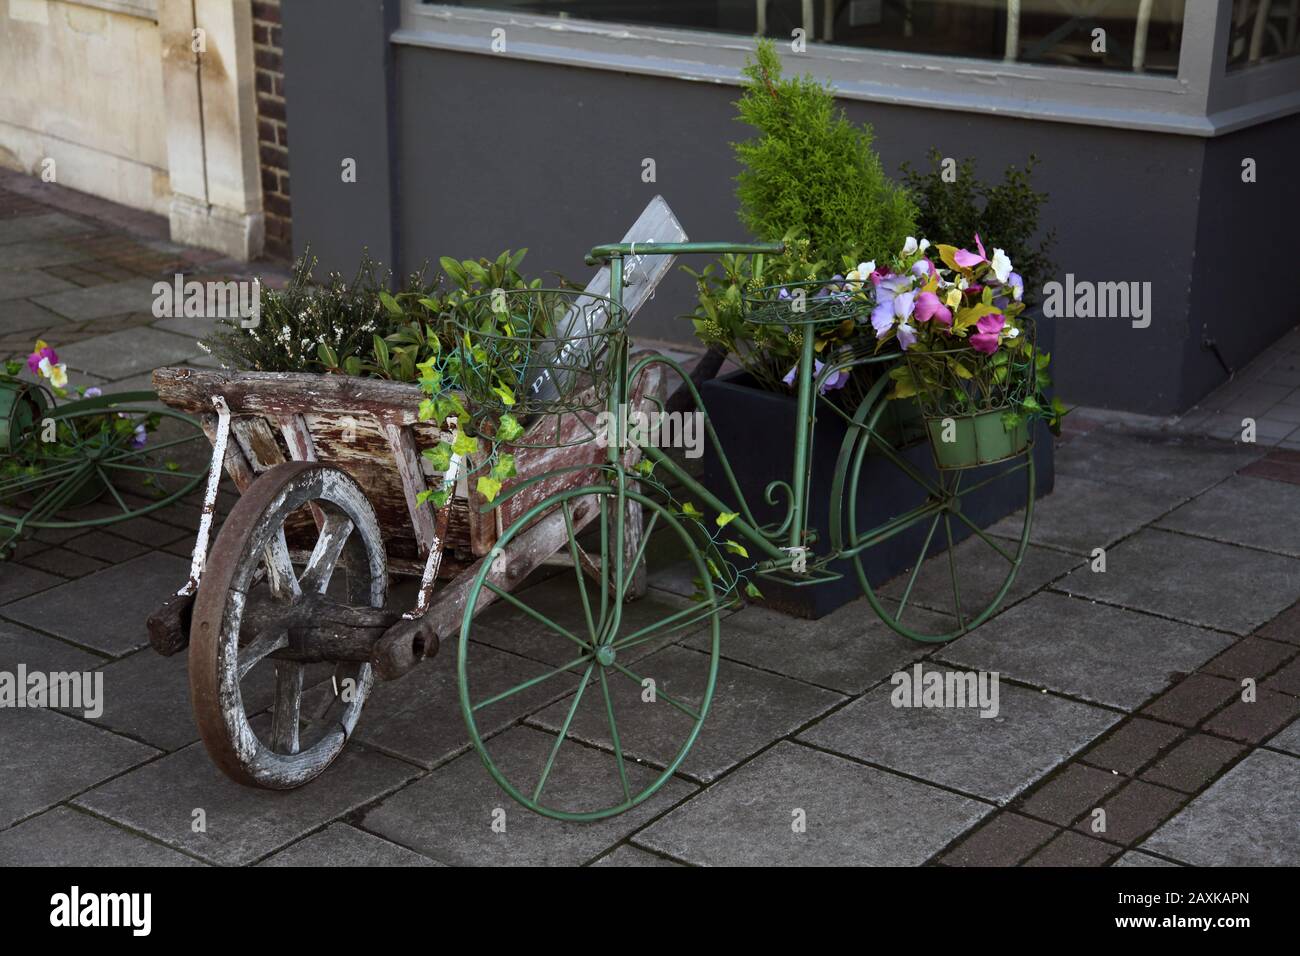 Interesting flower display in old wooden wheelbarrow and bicycle frame on High Street, Esher, Surrey, UK Stock Photo